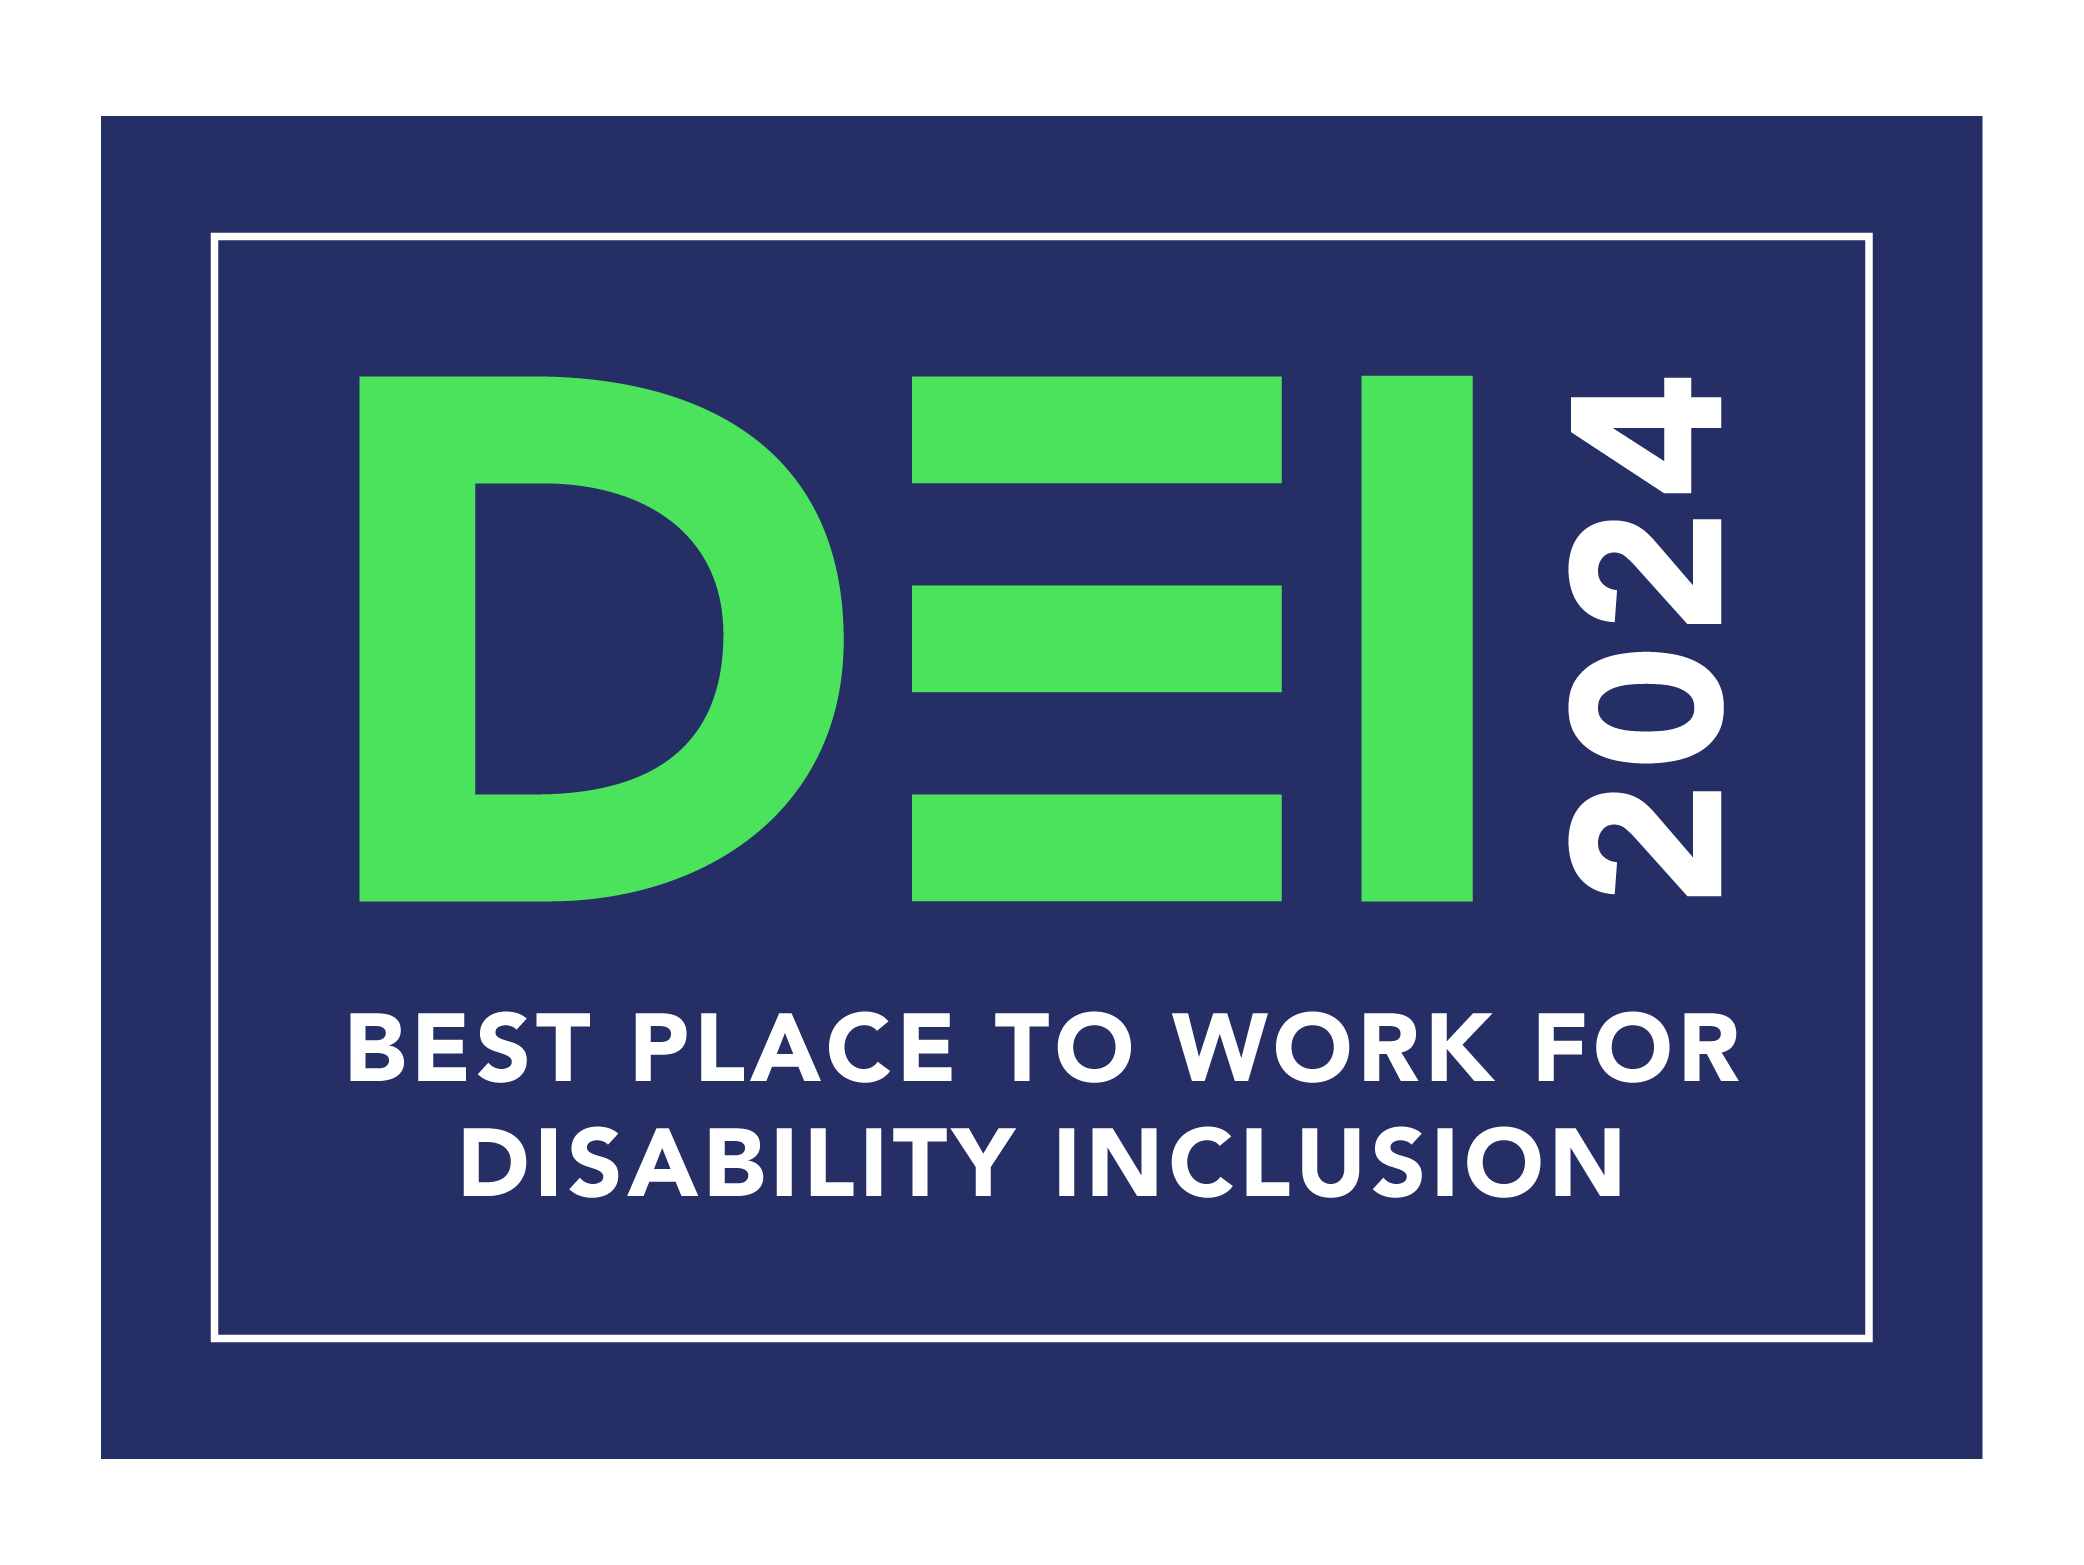 Best Place to work for disability inclusion